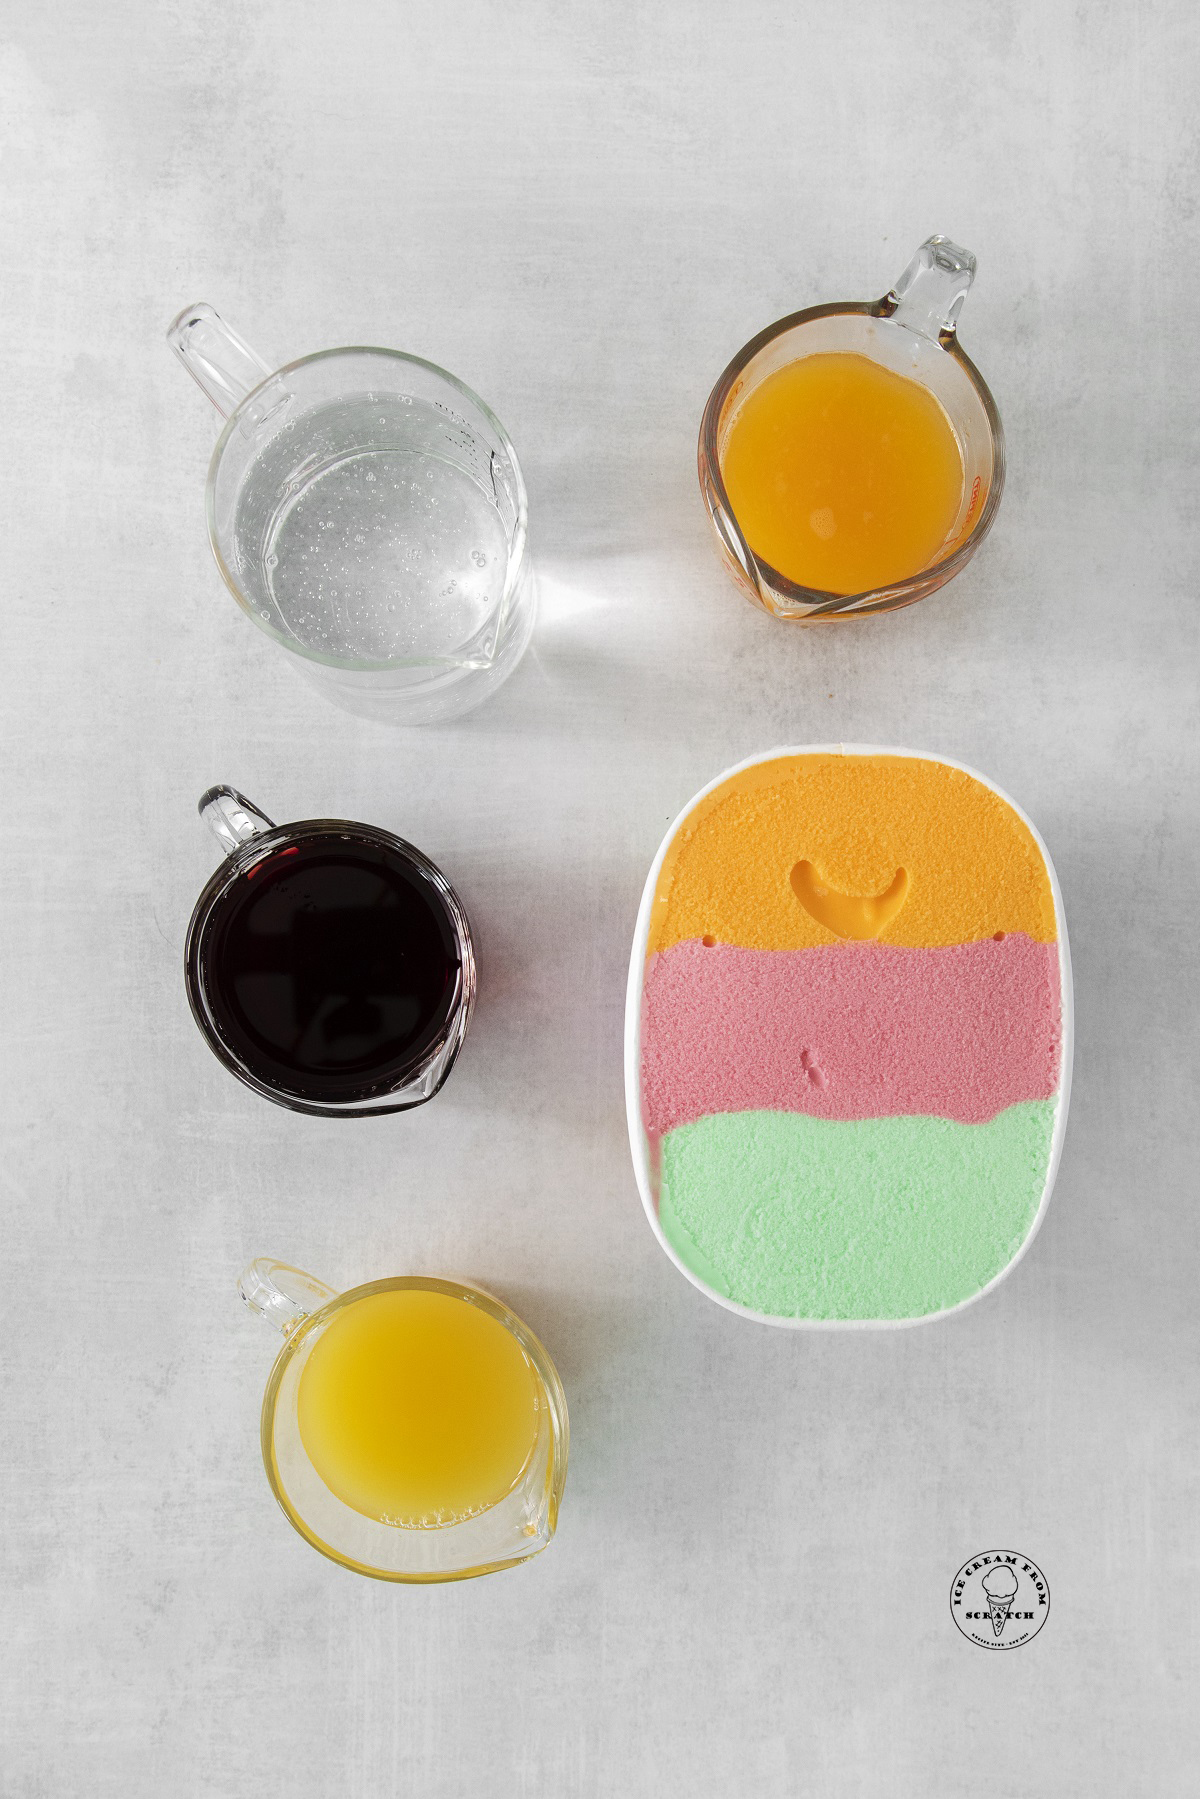 The ingredients for sherbet punch, including juice, soda, and rainbow sherbet, arranged on a counter and viewed from overhead.